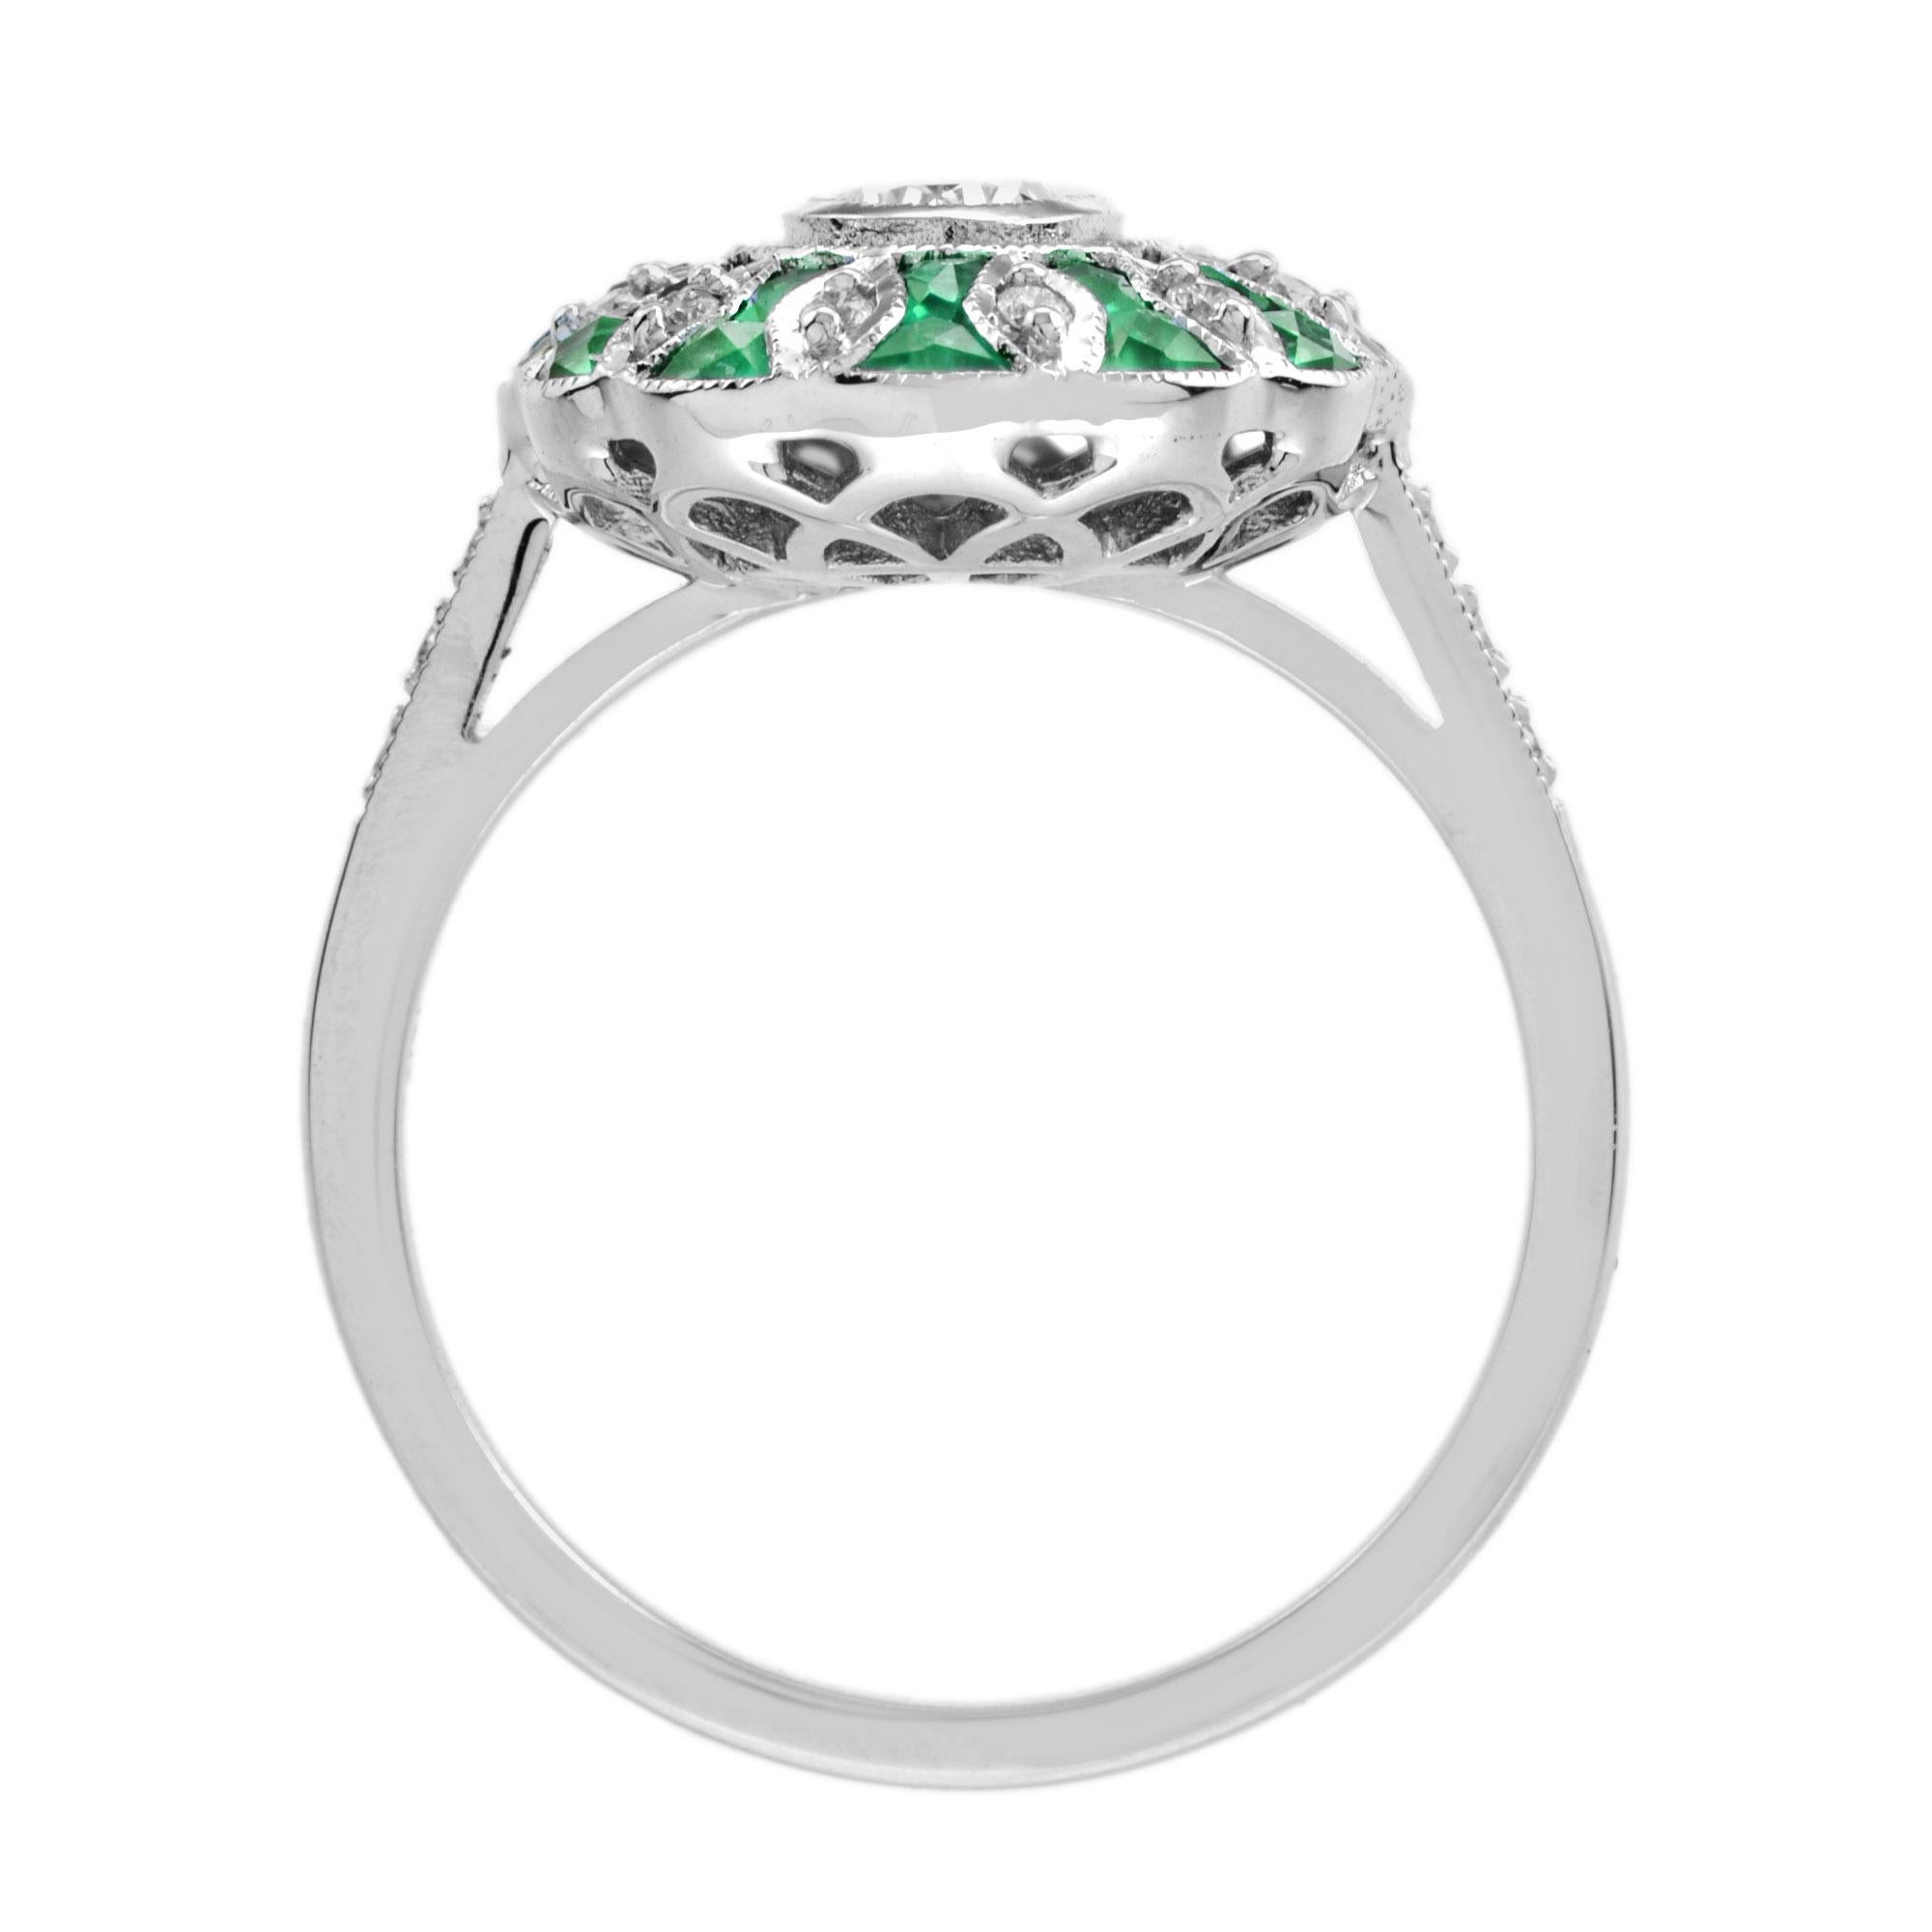 Oval Diamond and Emerald Art Deco Style Floral Engagement Ring in 18k White Gold For Sale 1